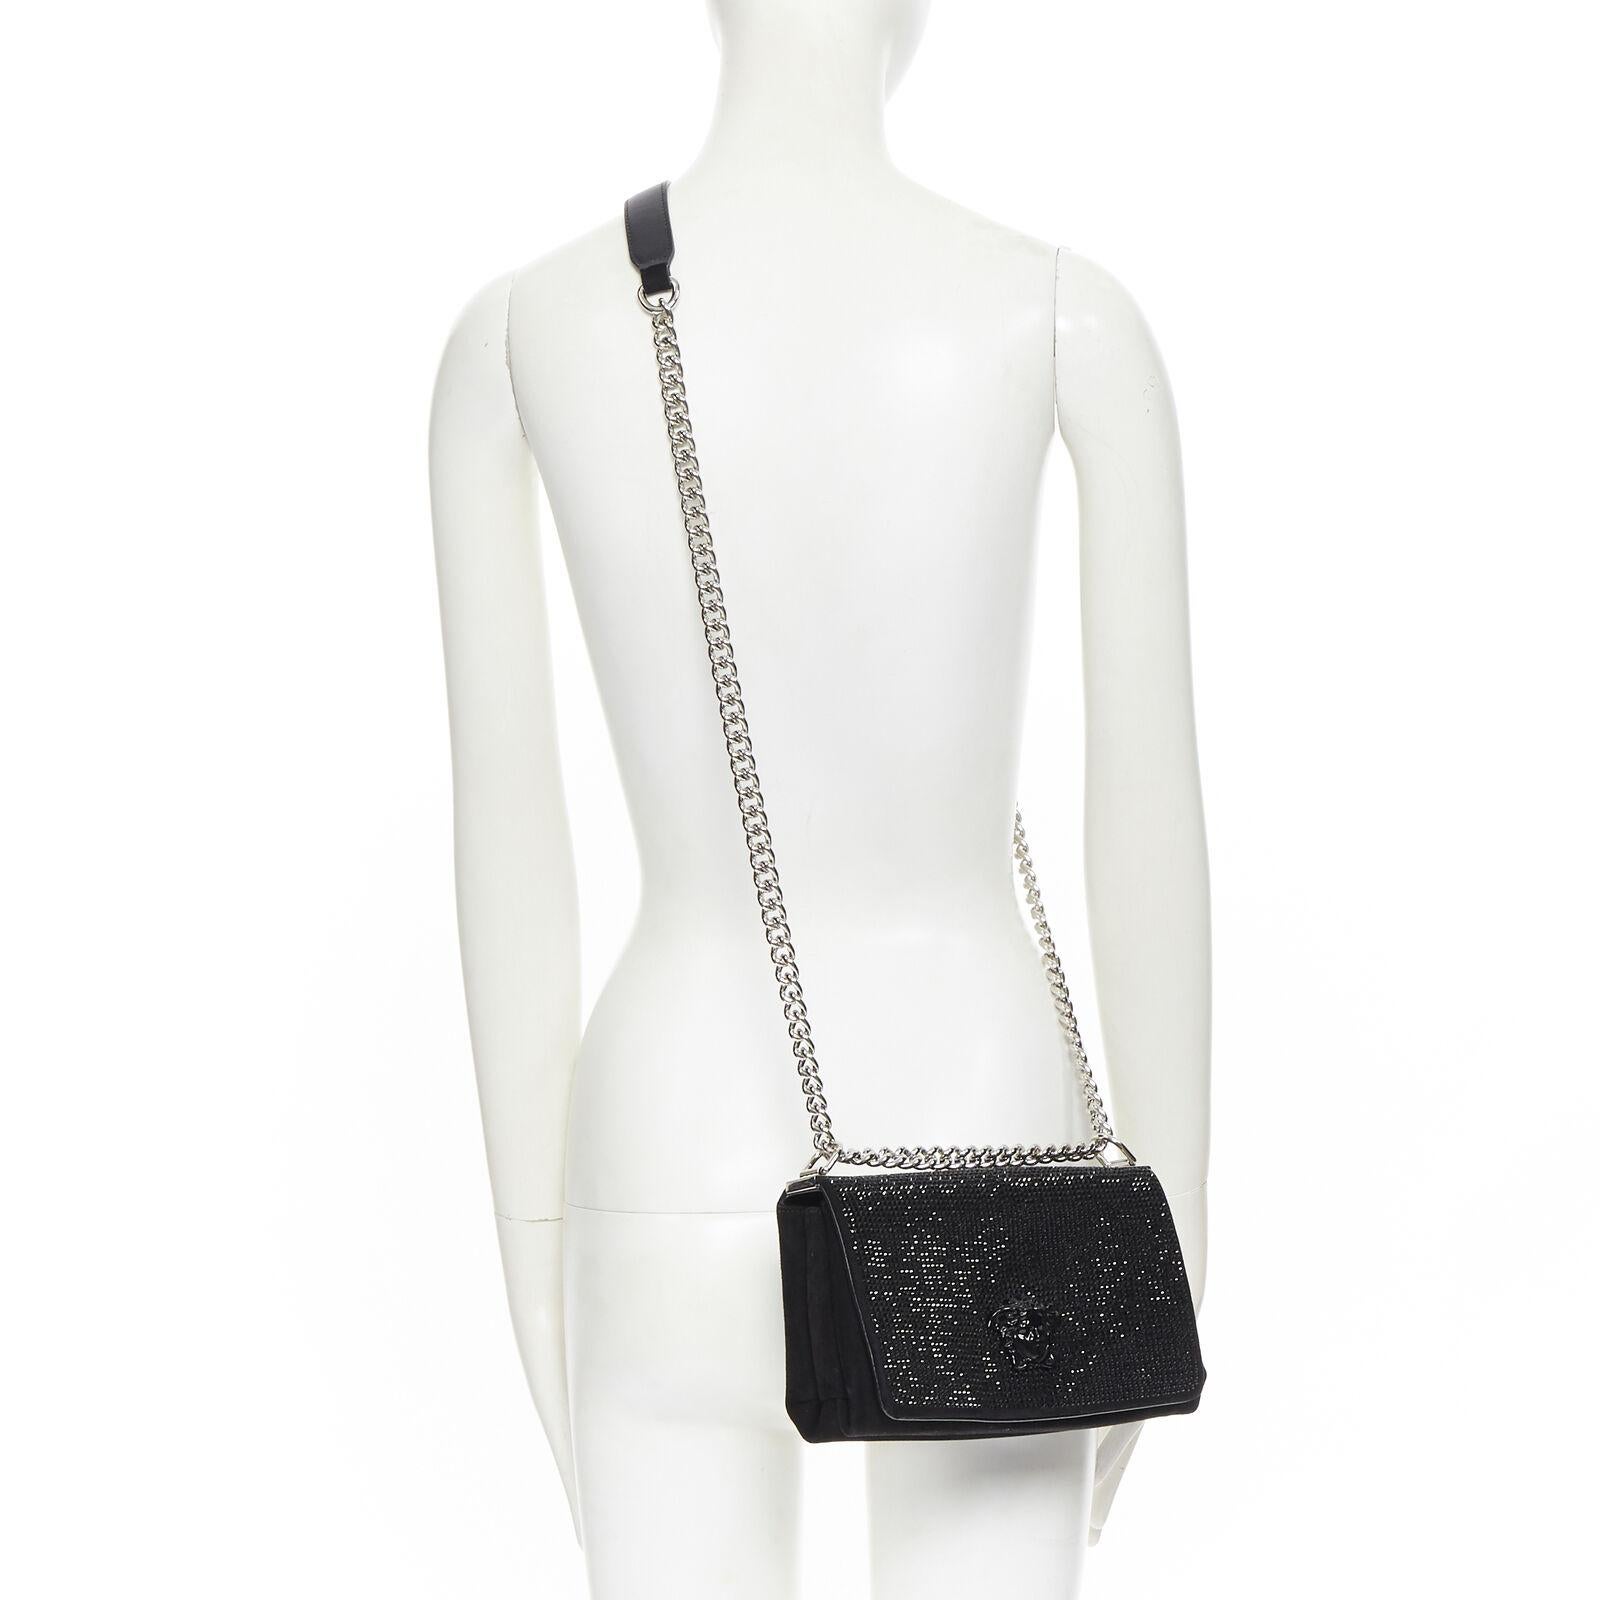 VERSACE 

Palazzo Medusa black strass embellished flap silver chunky chain bag
Brand: Versace
Designer: Donatella Versace
Model Name / Style: Palazzo Medusa Strass
Material: Leather; calf
Color: Black
Pattern: Solid
Closure: Magnetic
Extra Detail: